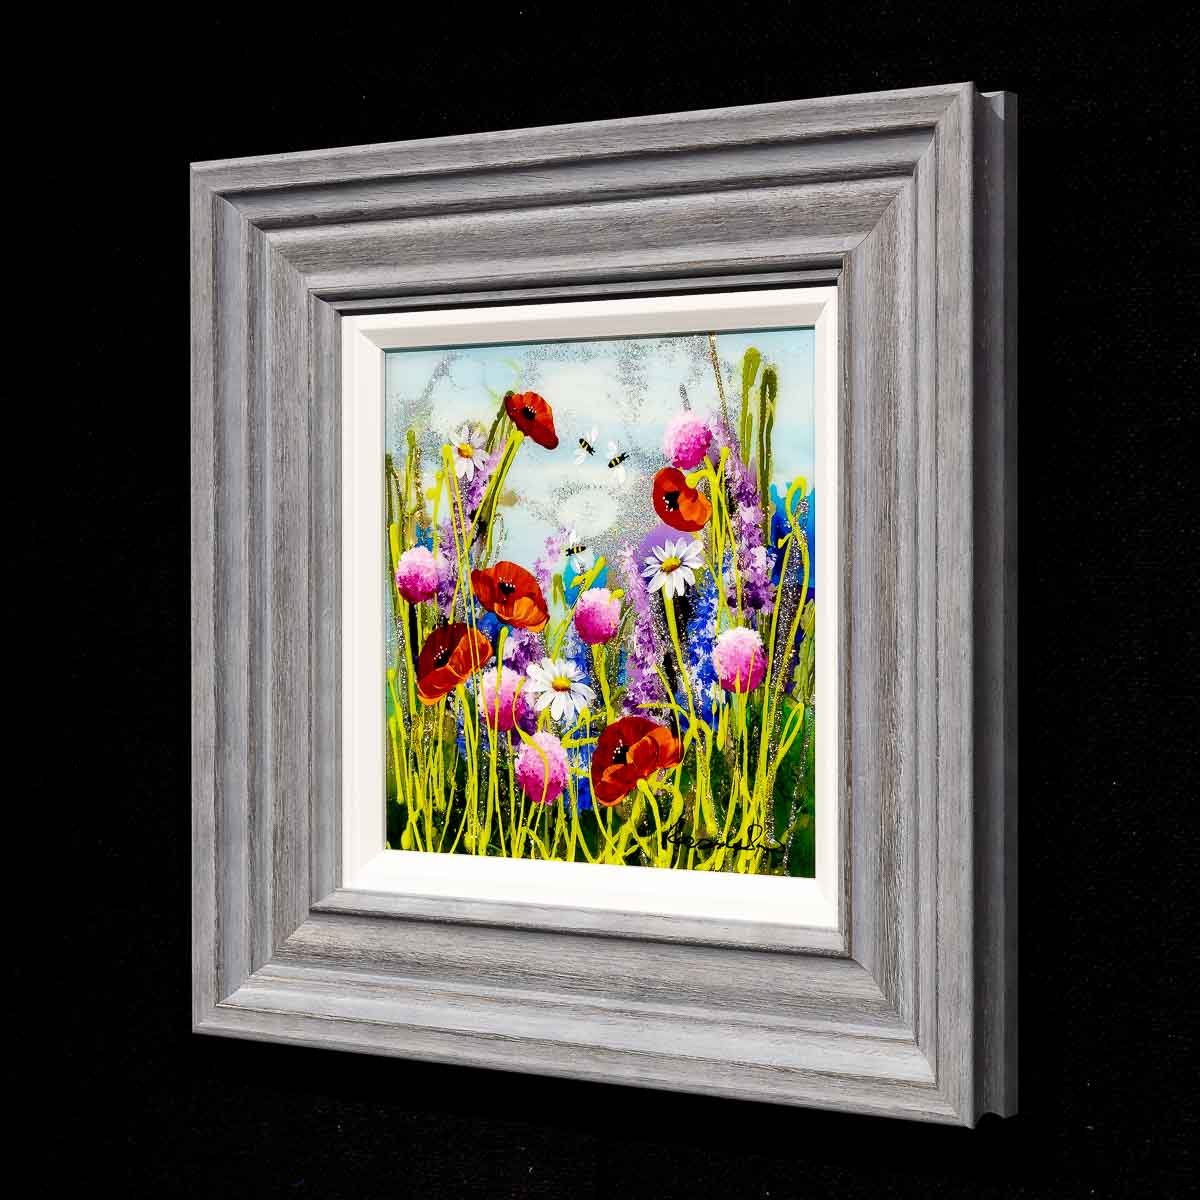 Busy Bees I - Original Rozanne Bell Framed